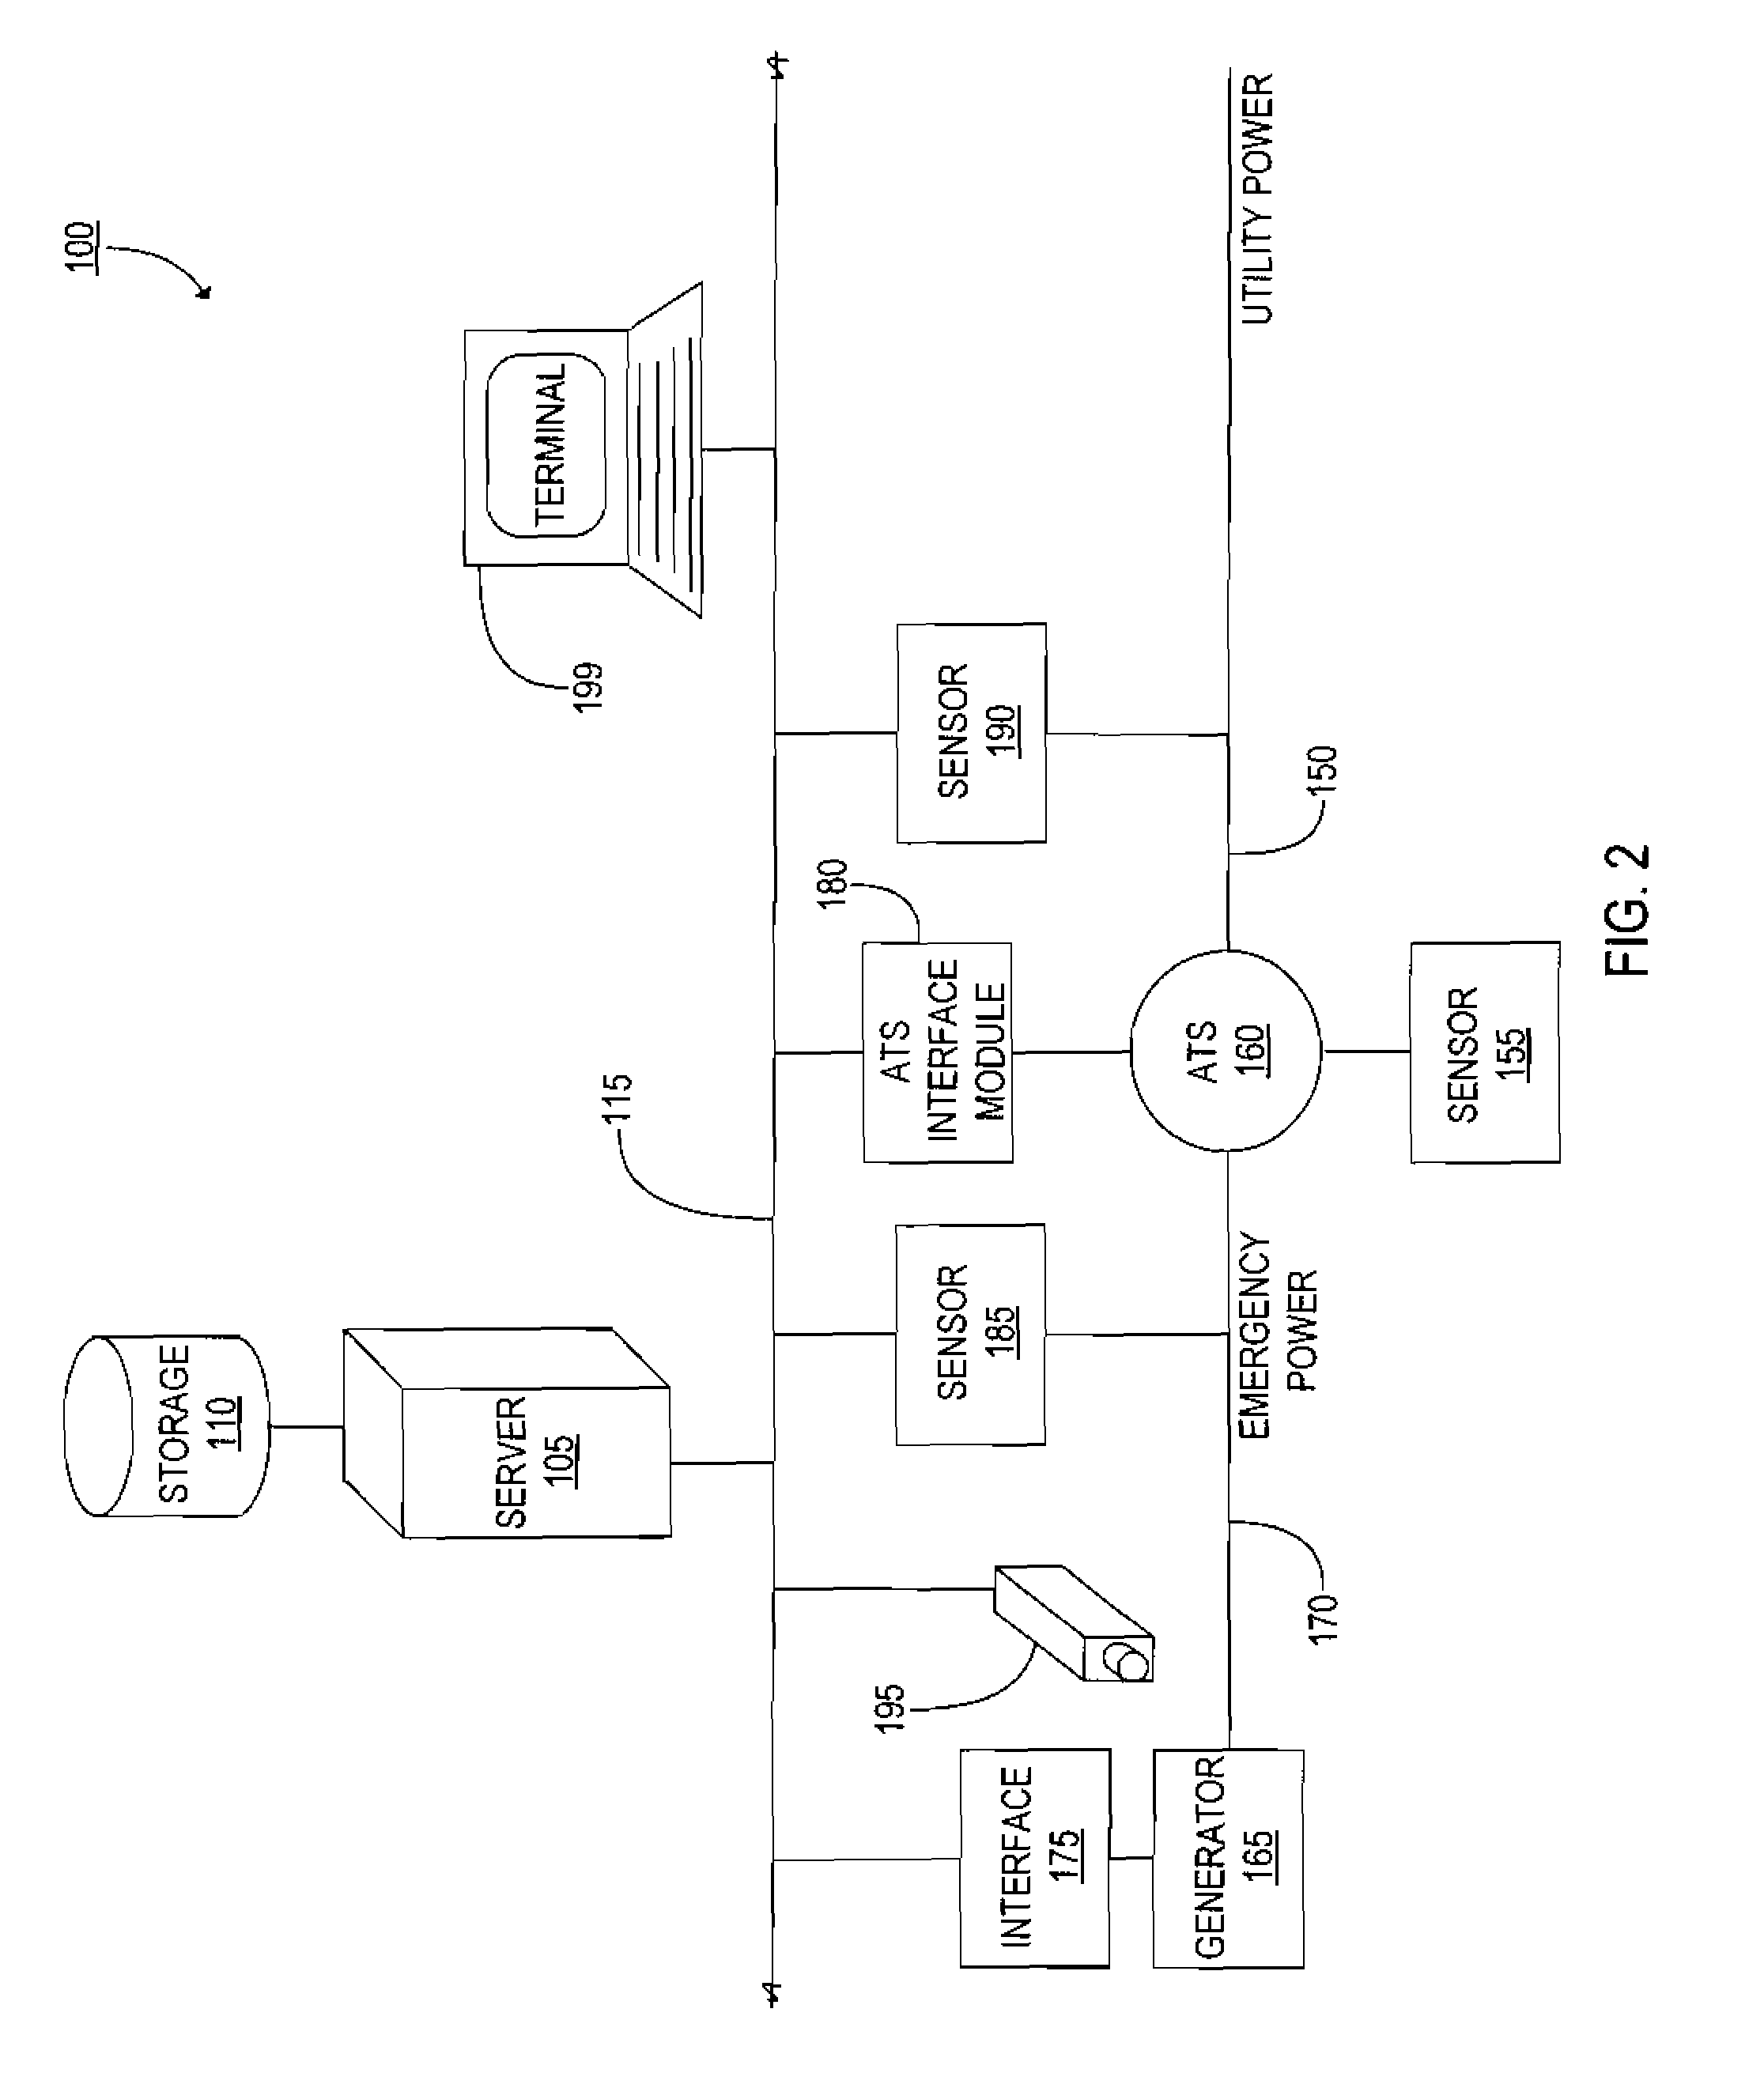 Systems, methods, and devices for managing emergency power supply systems